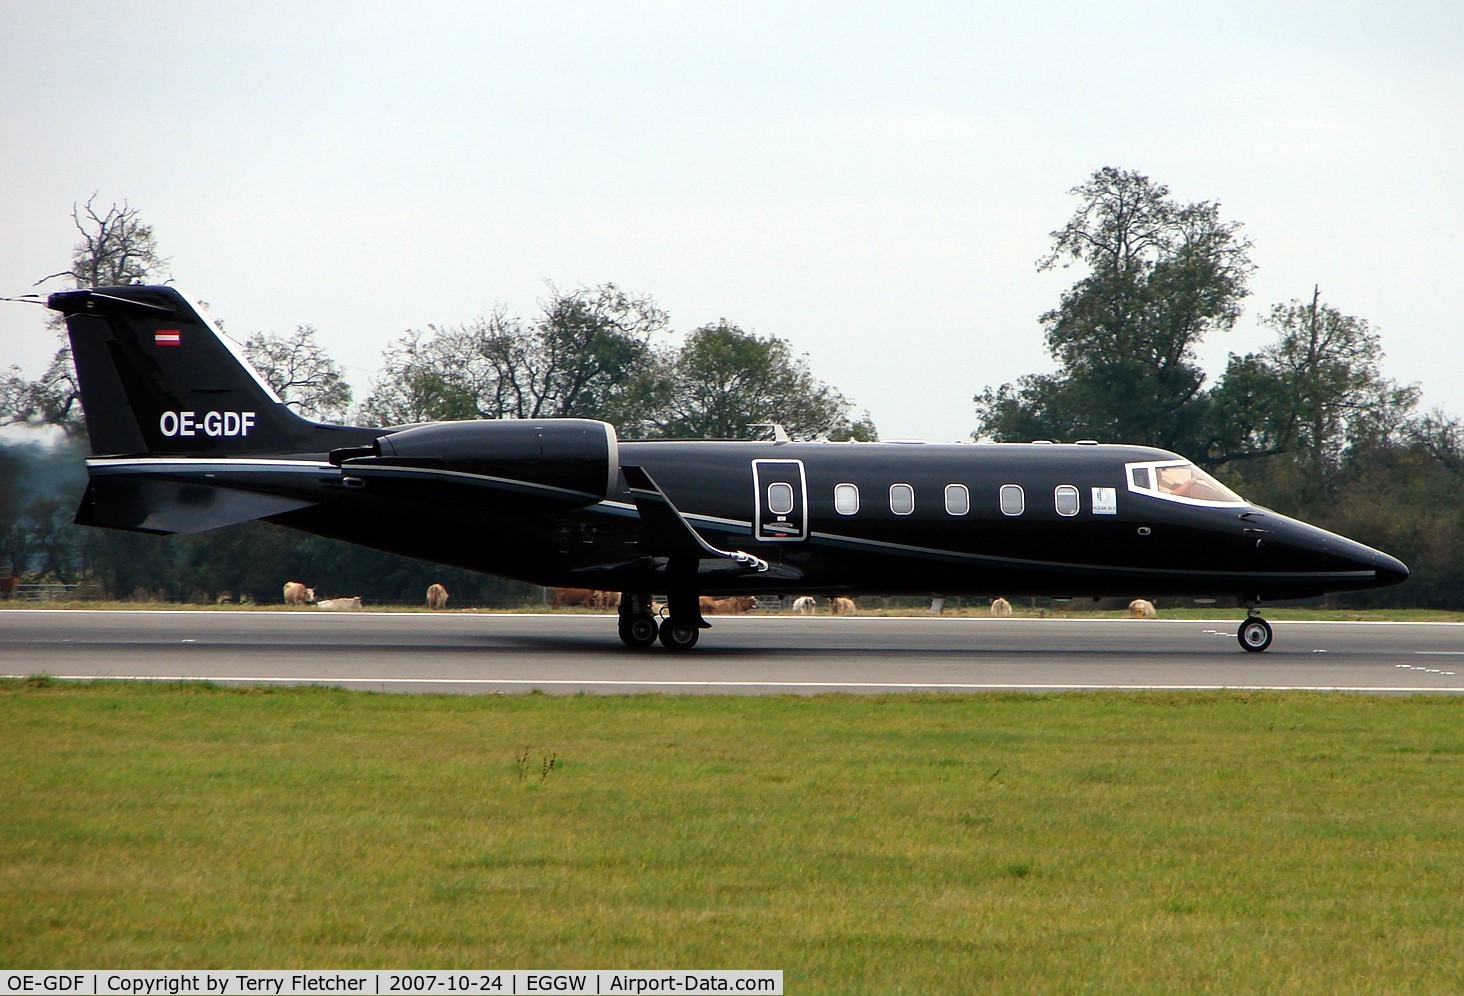 OE-GDF, 2004 Learjet 60 C/N 60-276, on a busy day at Luton Airport (UK)